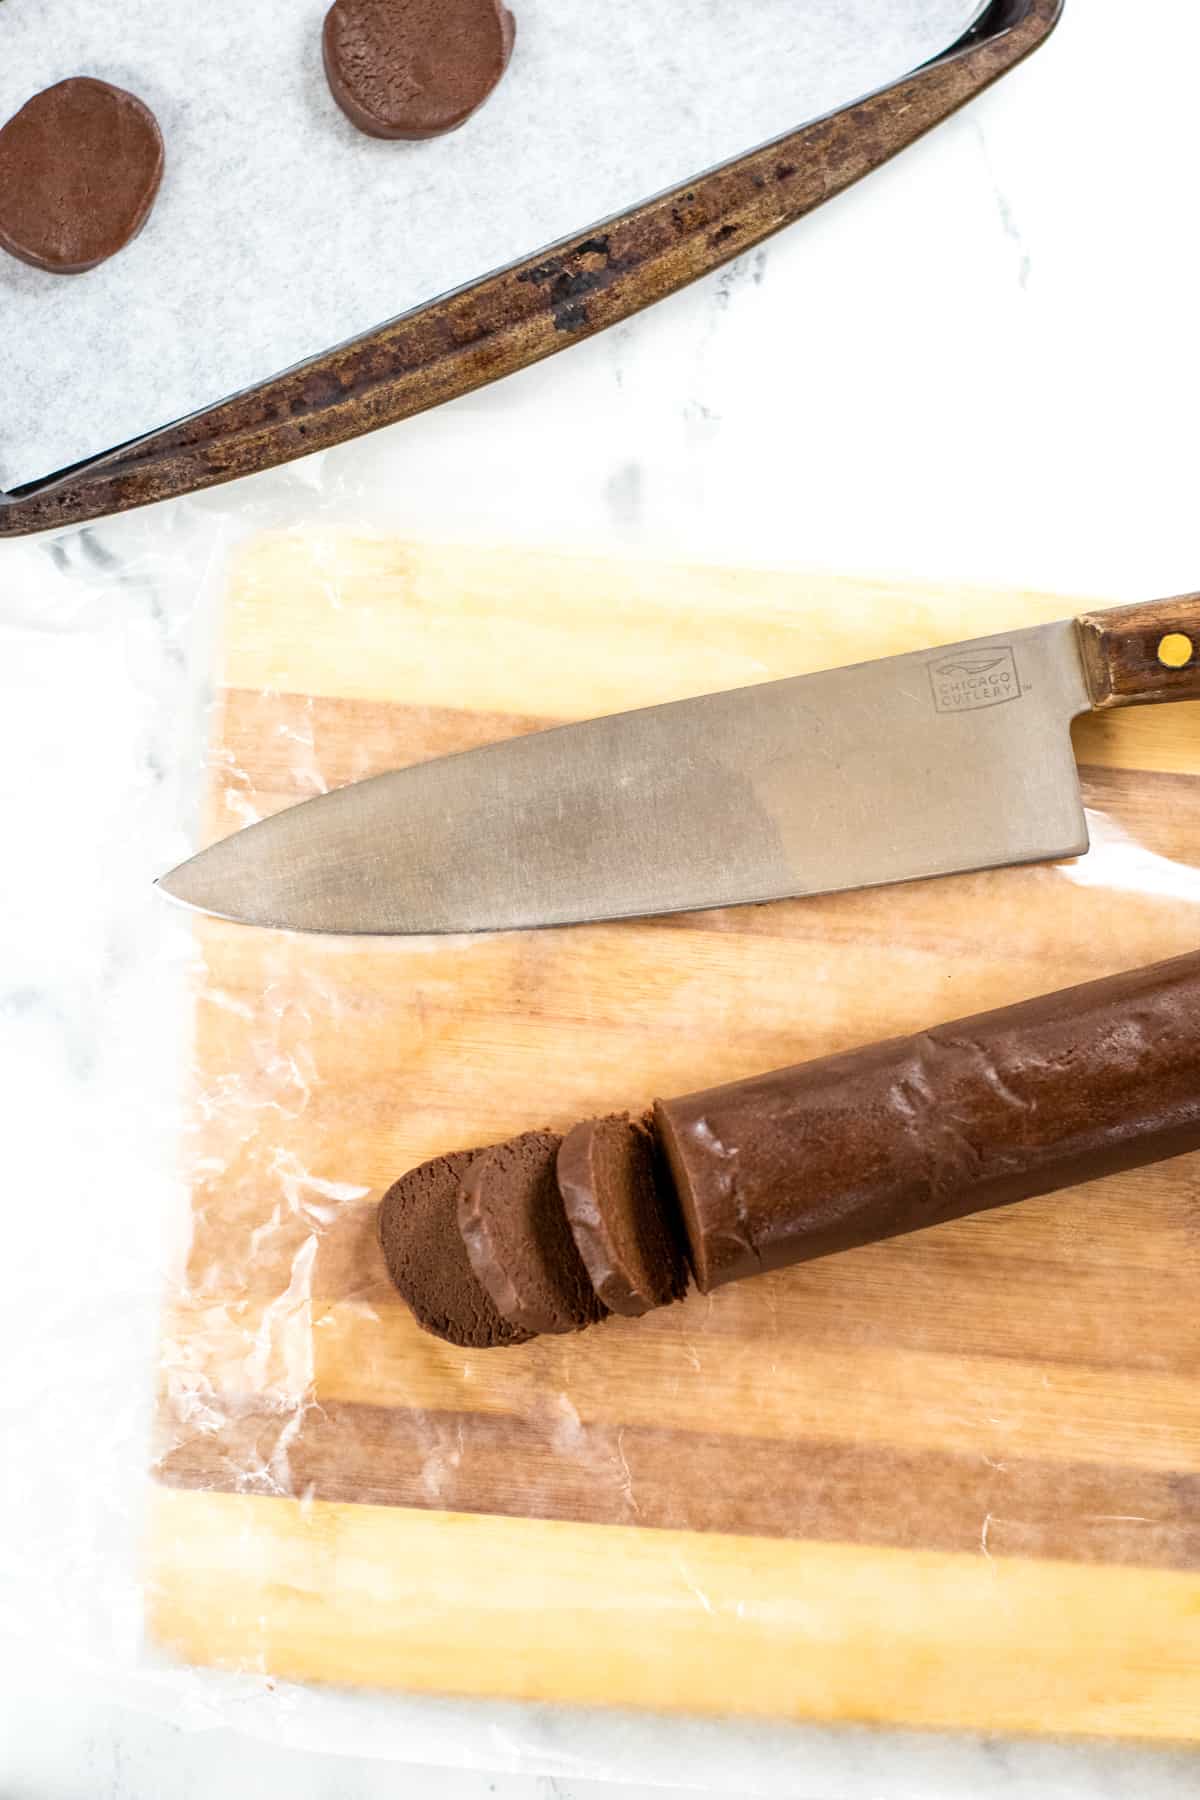 Cutting board with log of chocolate cookie dough, some of which as been cut into slices. Large knife is on cutting board and lined baking sheet with slices of cookies are shown as well.